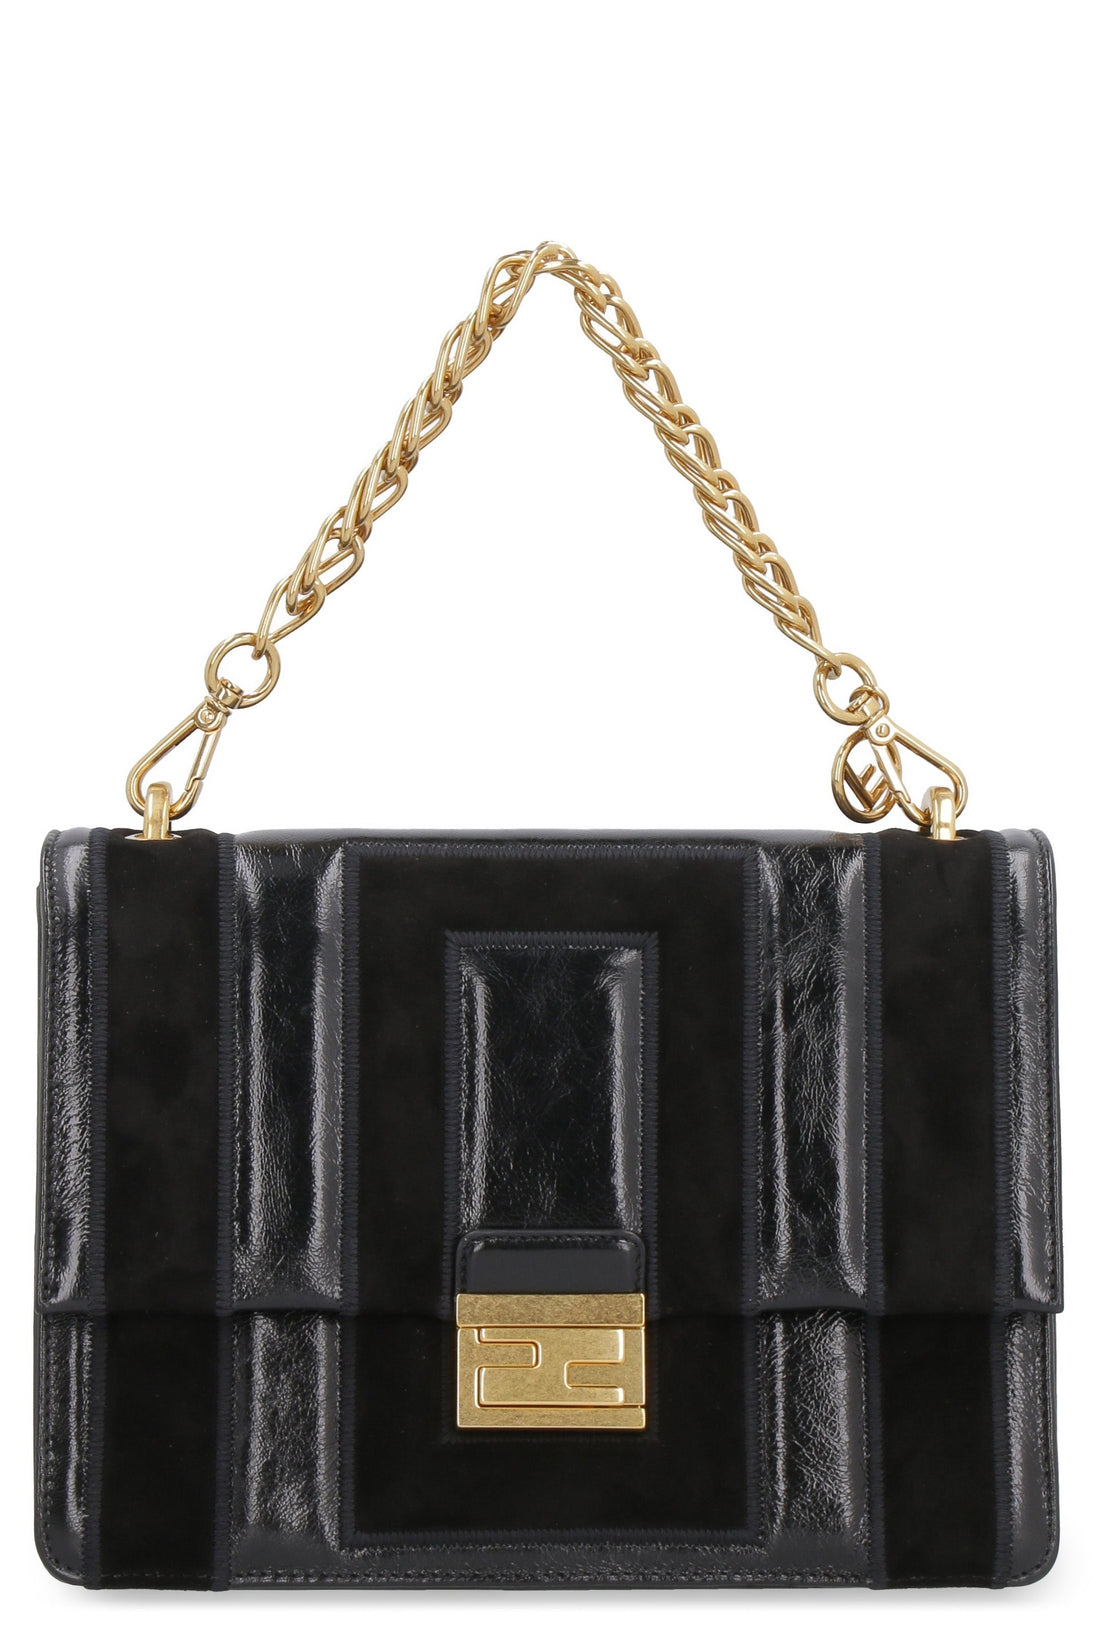 Fendi-OUTLET-SALE-Kan U leather and suede crossbody bag-ARCHIVIST